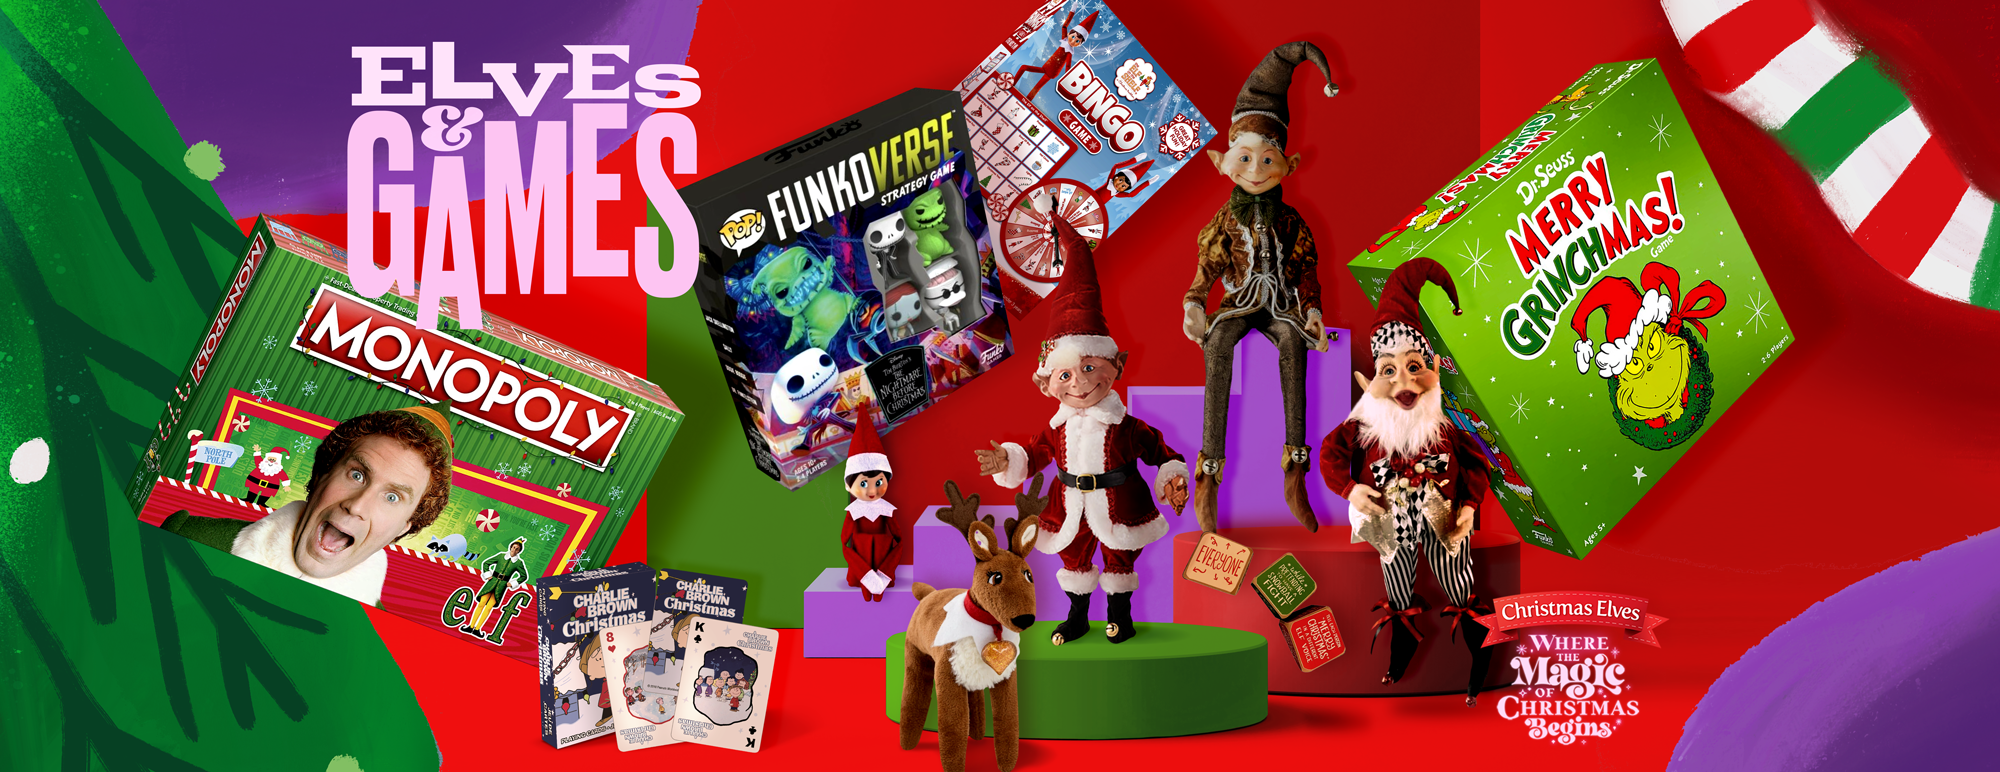 Games, Puzzles & Books at Christmas Elves!